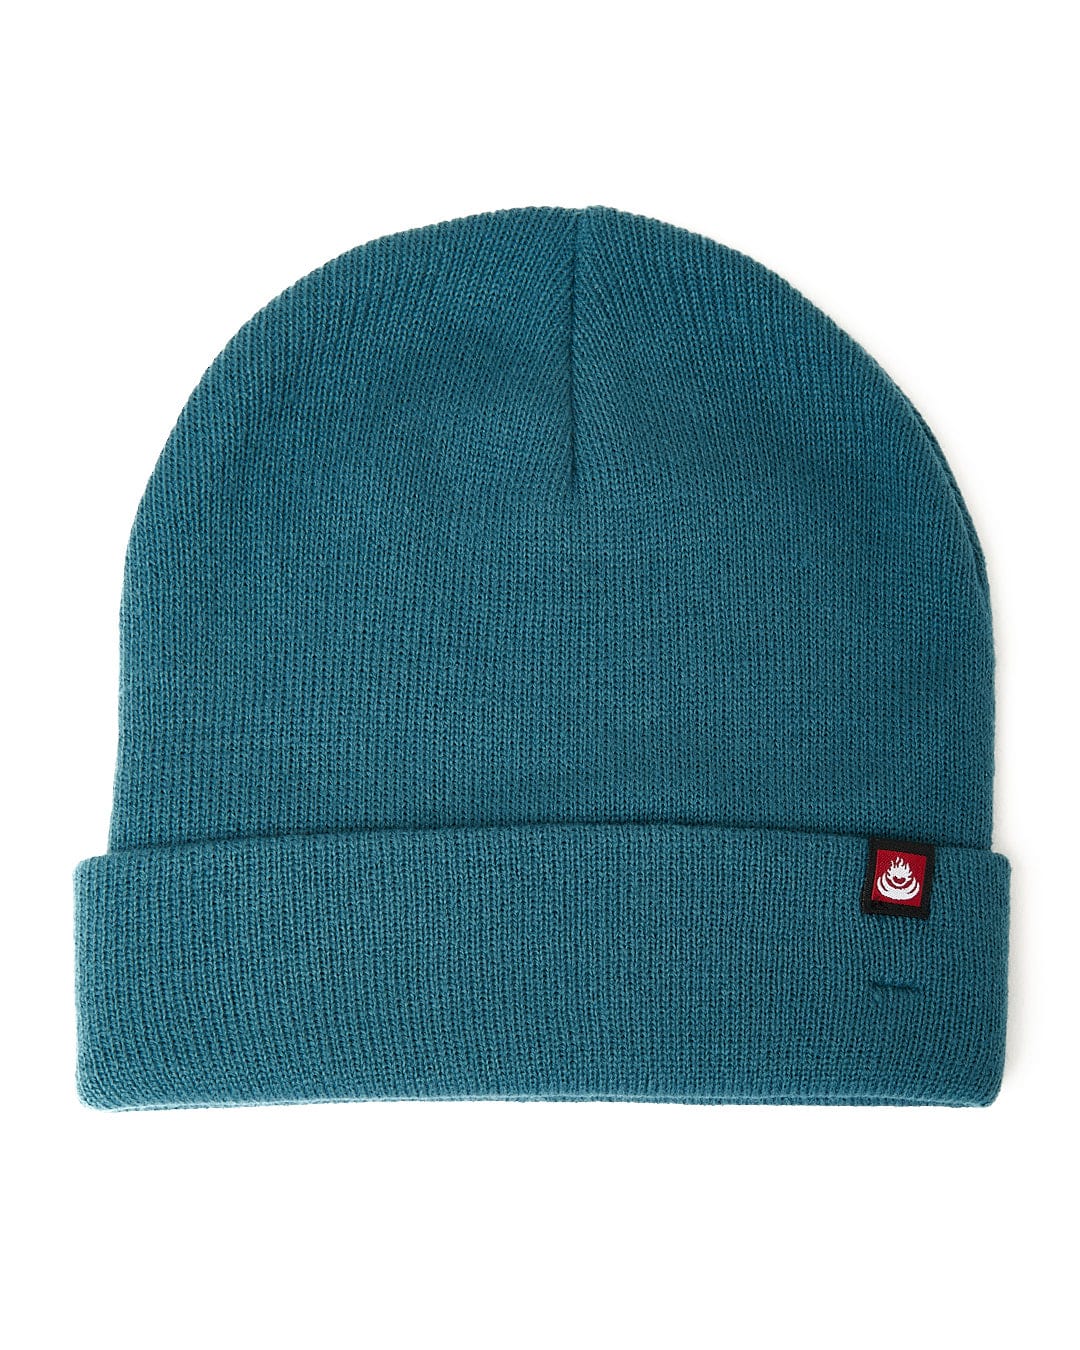 A Saltrock Ok - Tight Knit Beanie - Blue with a red logo on it.